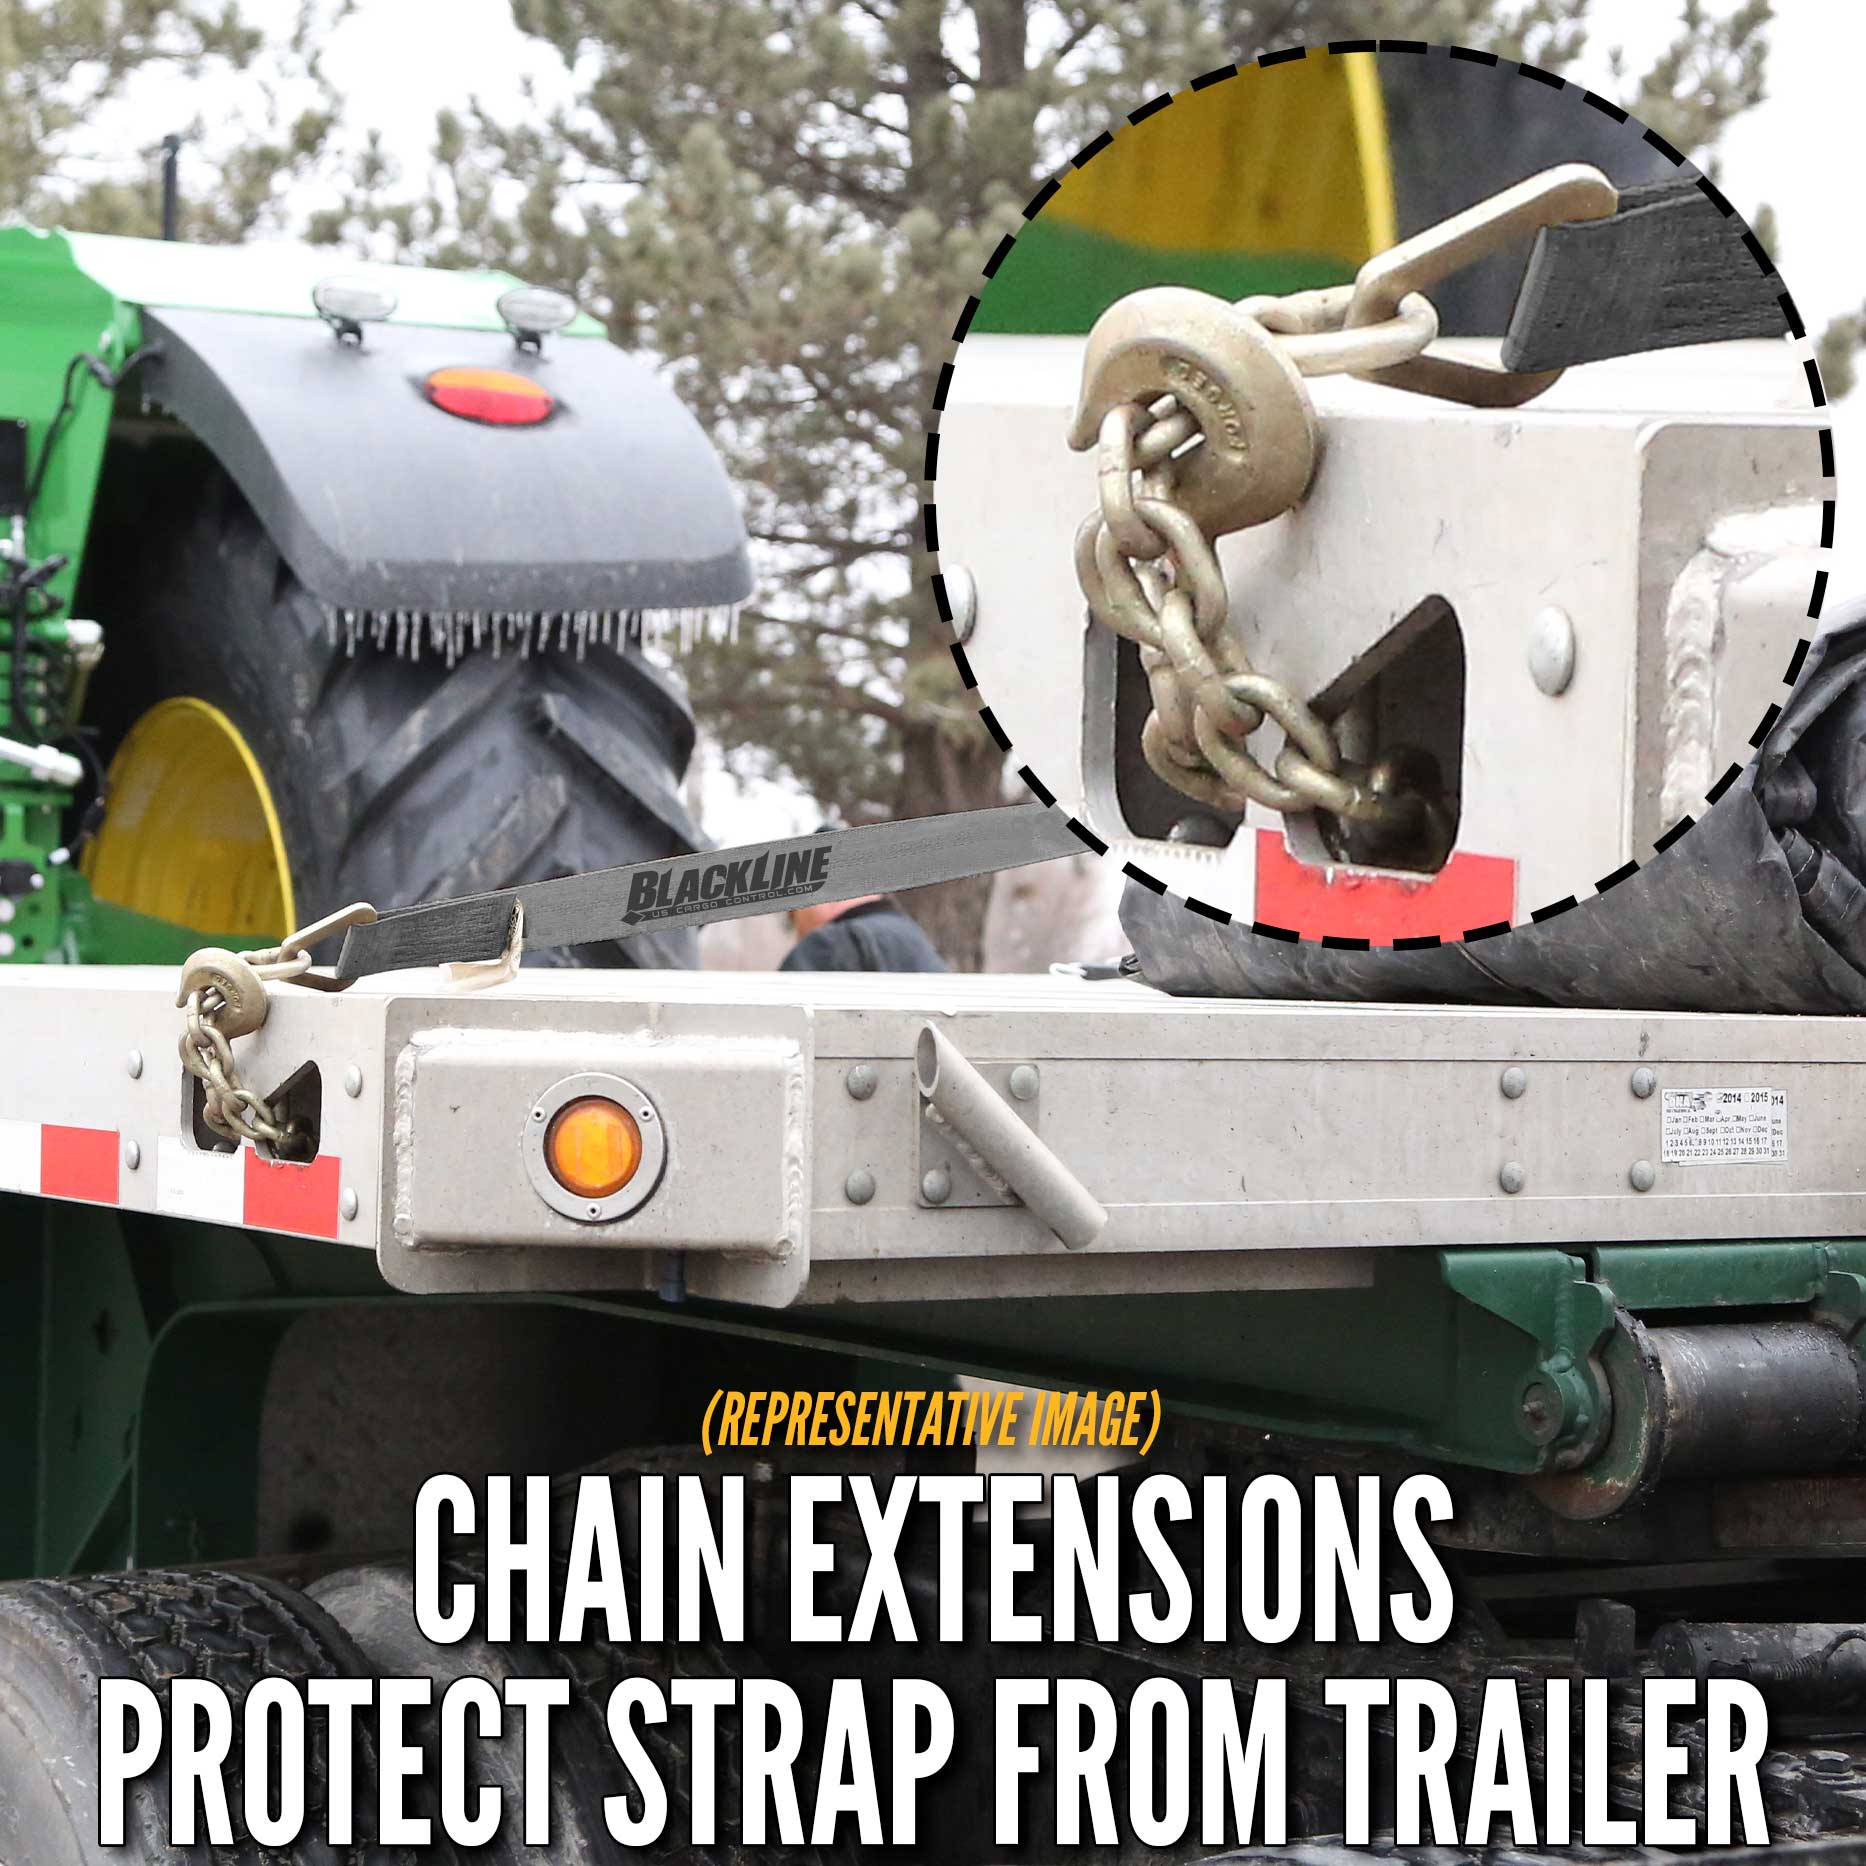 30' heavy-duty ratchet strap -  chain ends protect strap from trailer